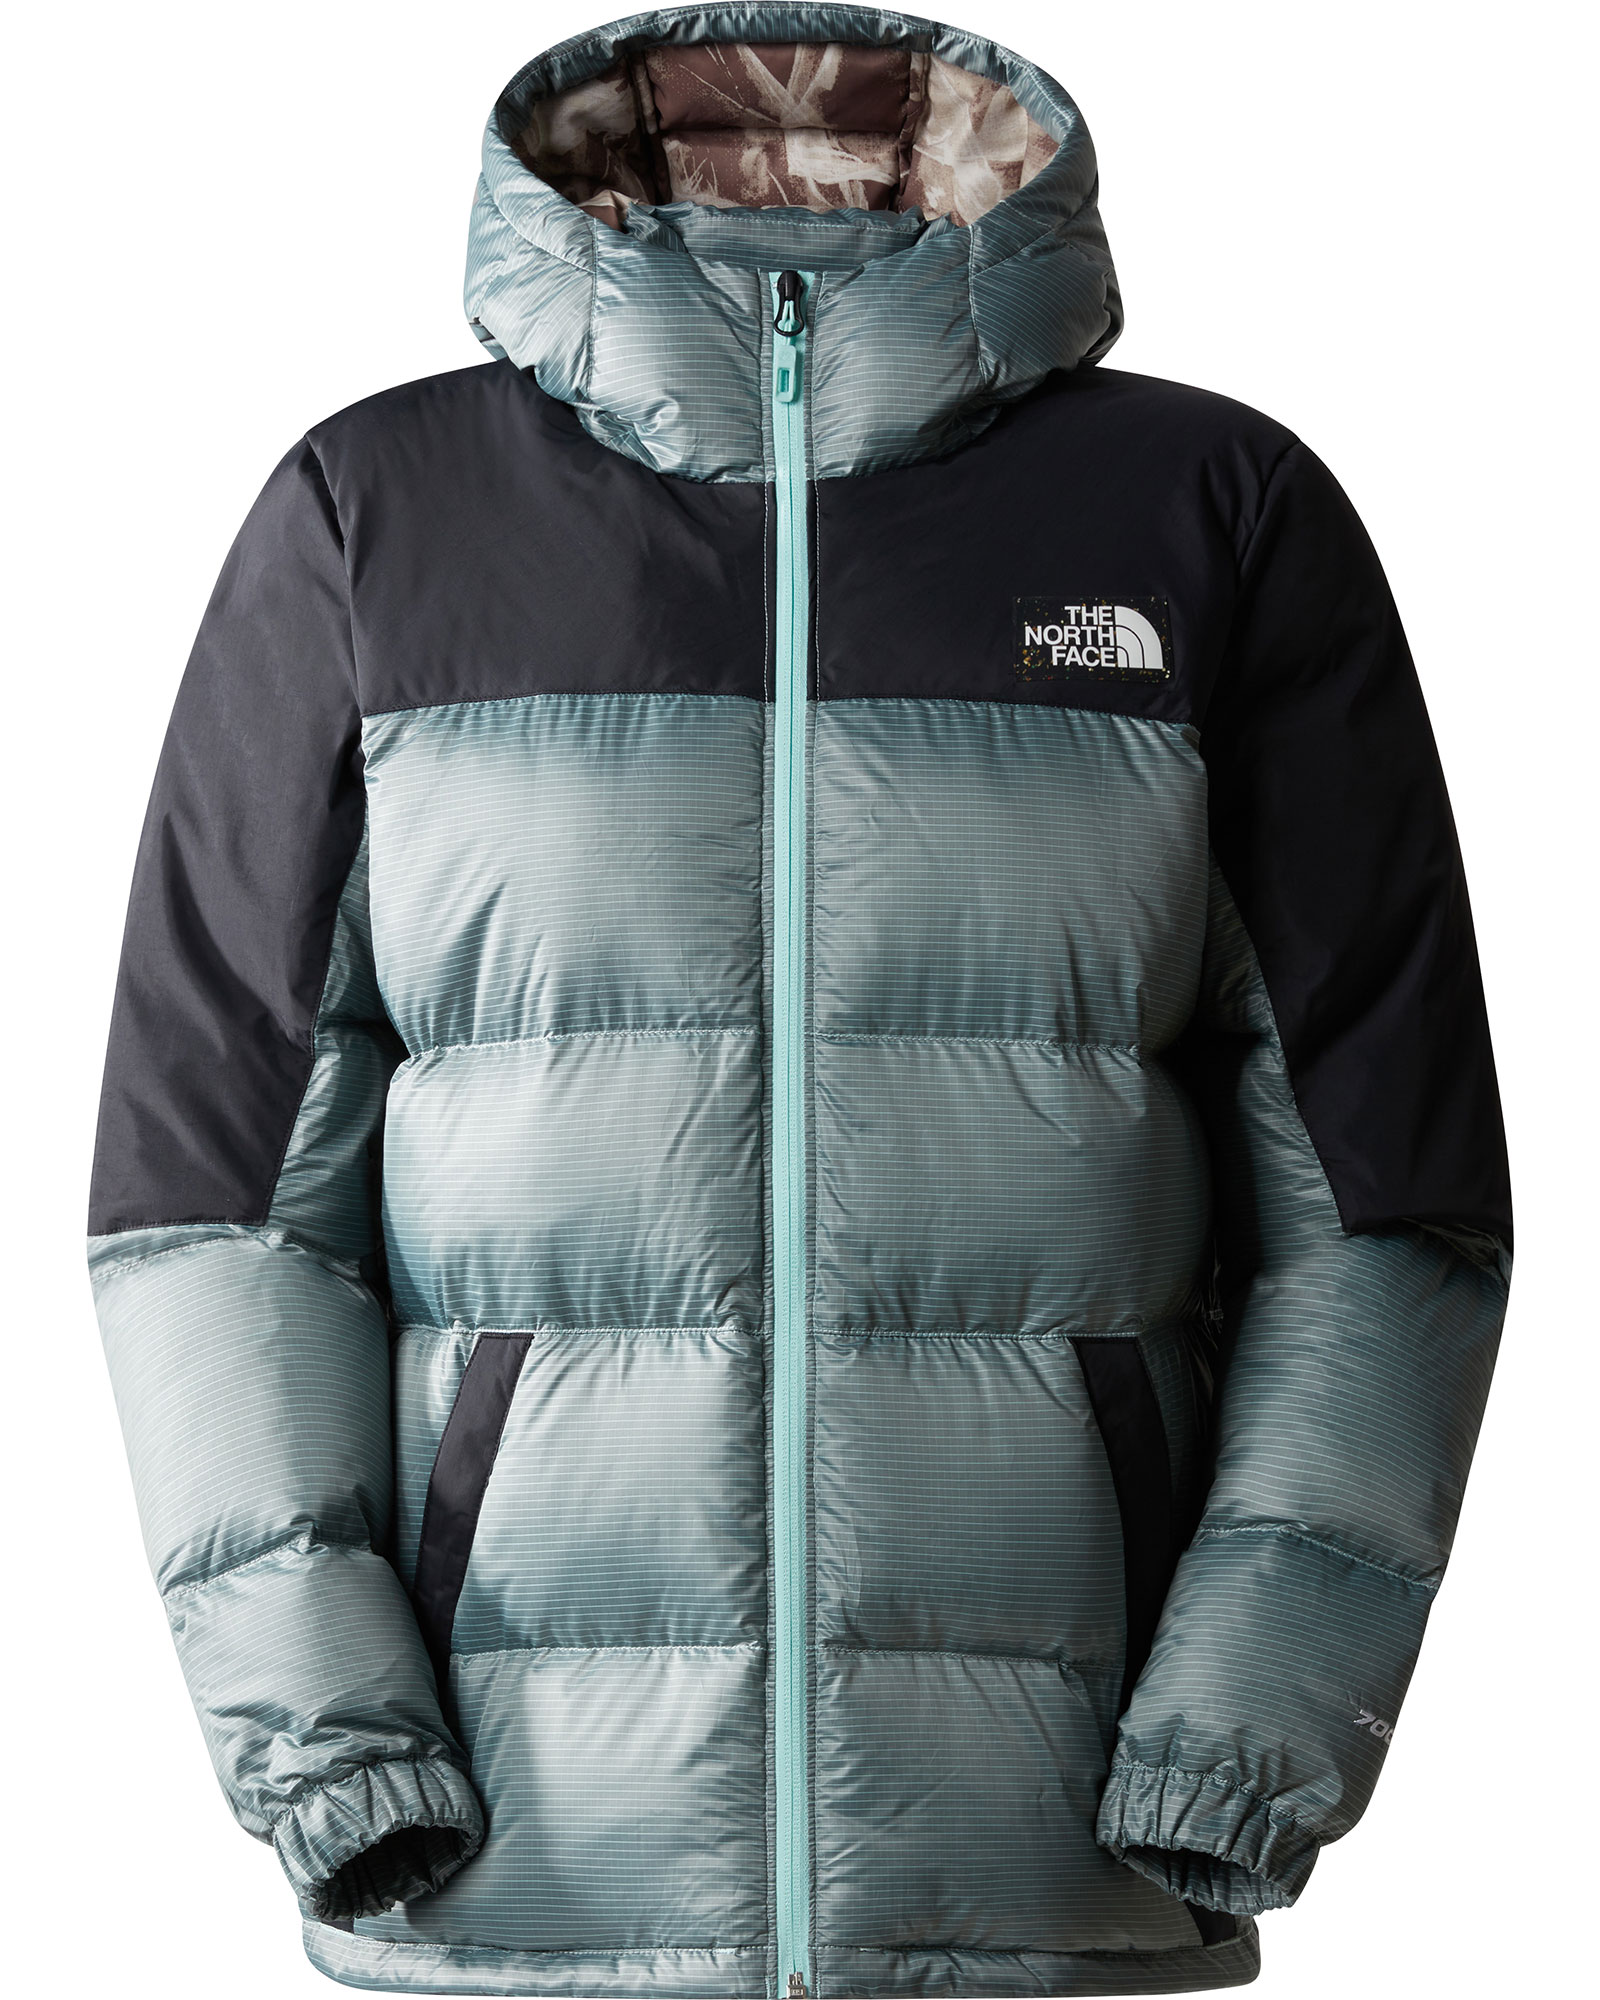 The North Face Diablo Recycled Women’s Down Hoodie - Powder Teal-TNF Black XL